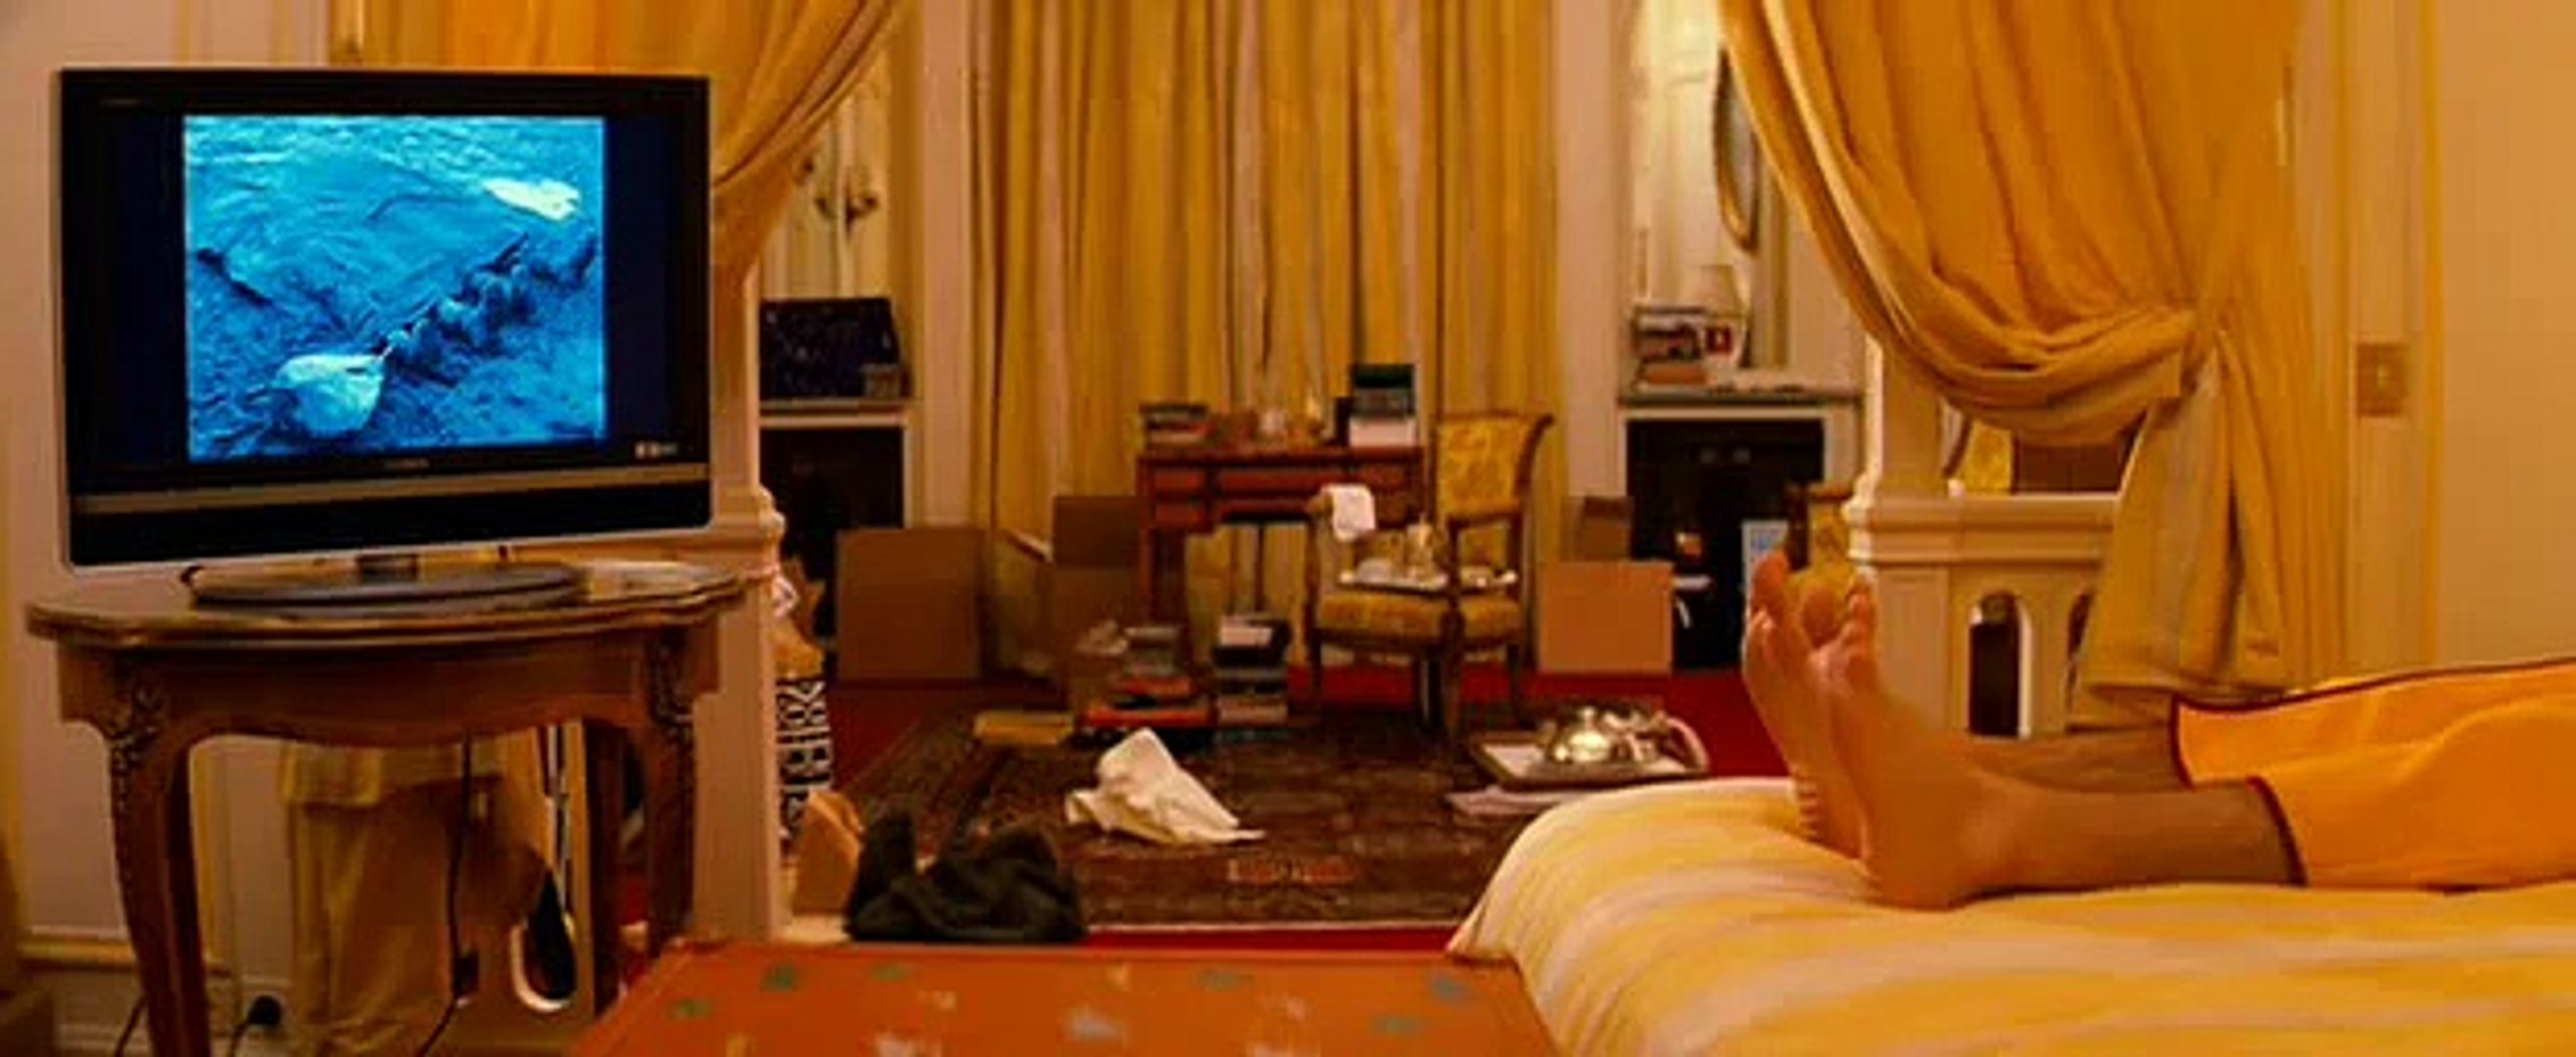 Hotel Chevalier - Wes Anderson - video Dailymotion